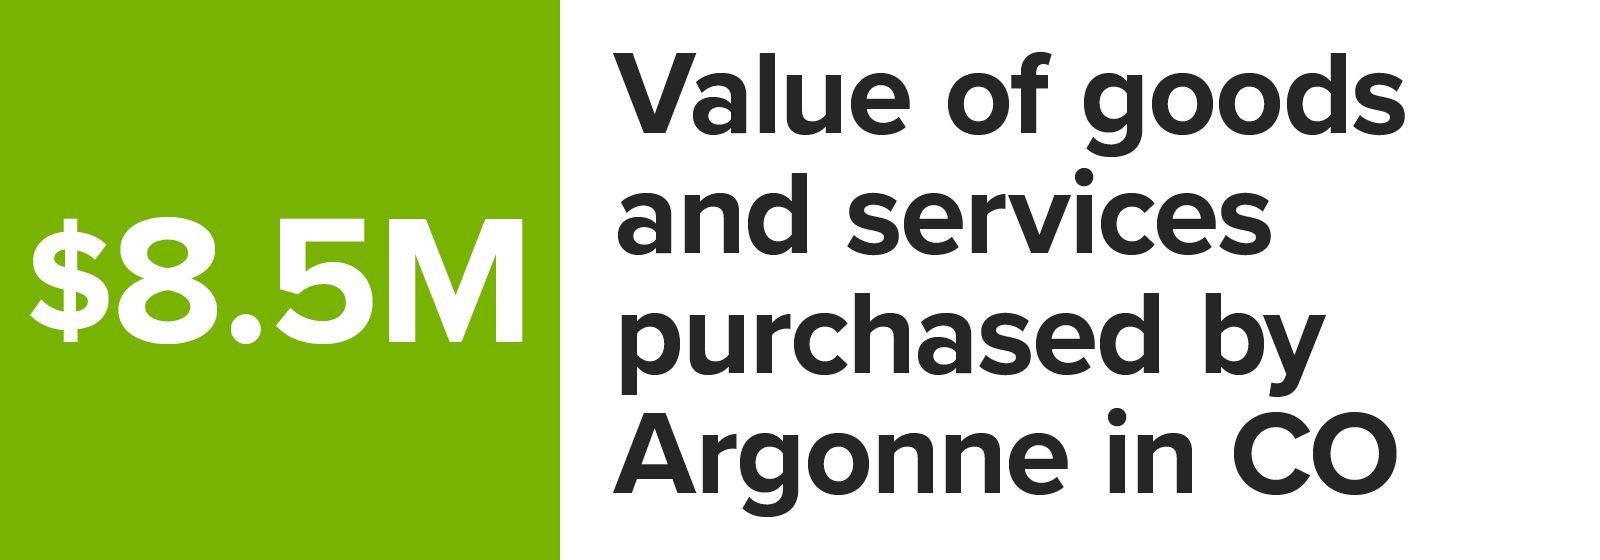 Number graphic value of goods and services purchased by Argonne in Colorado